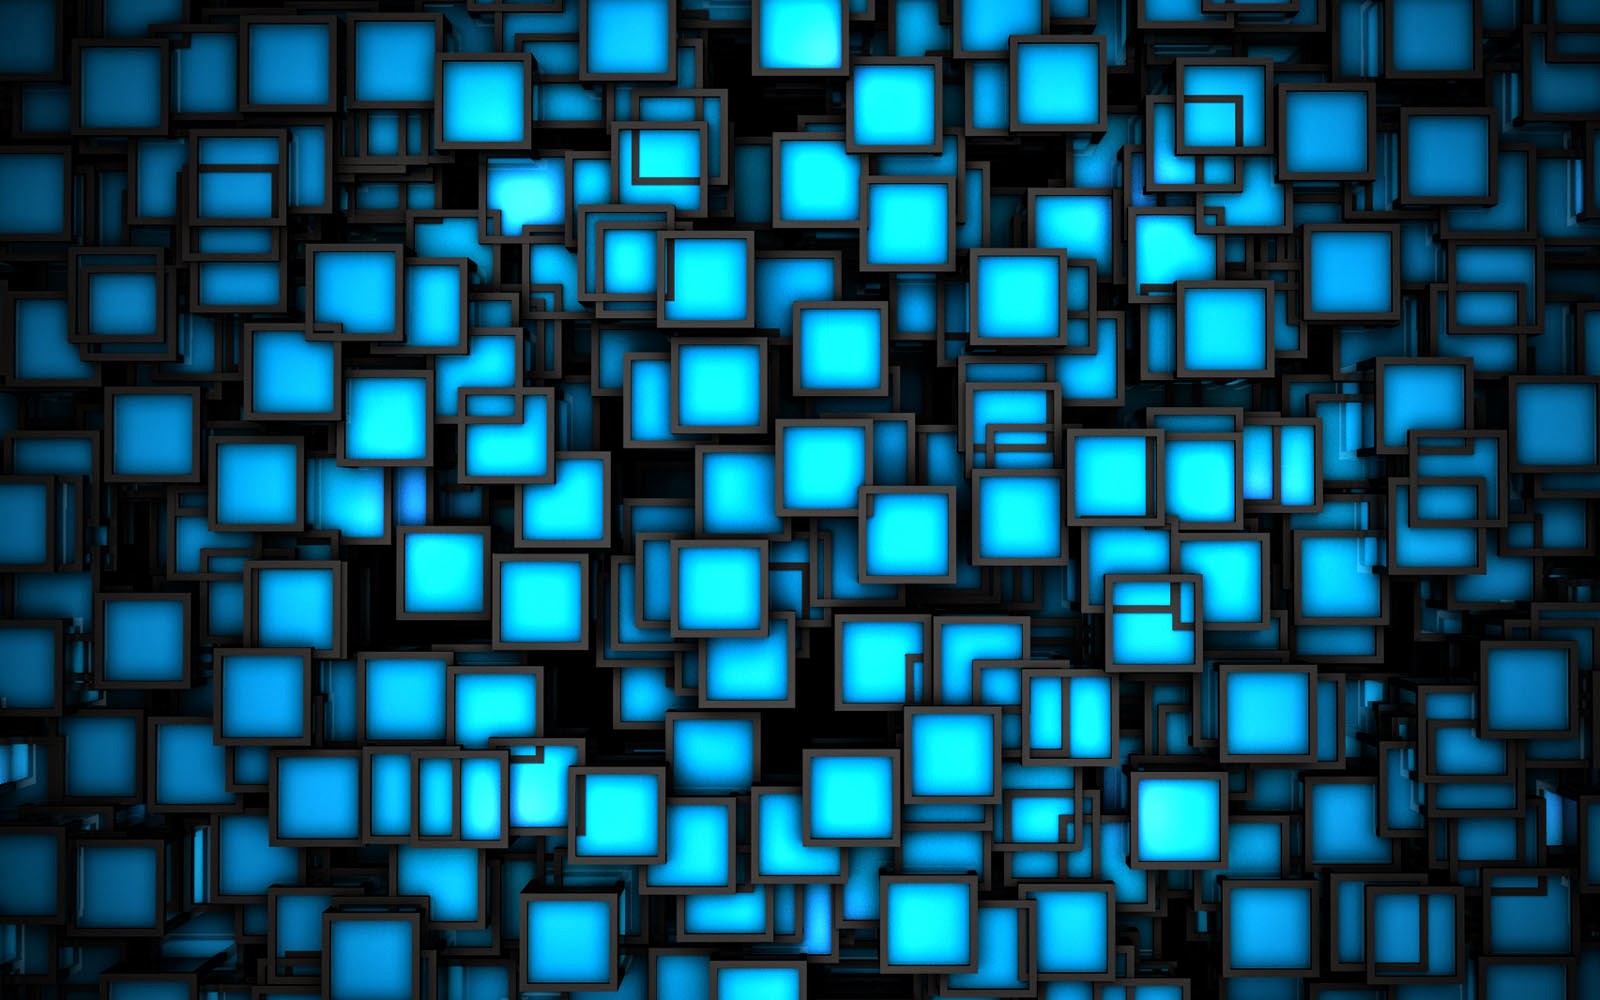 Wallpapers Abstract Squares Wallpapers Afalchi Free images wallpape [afalchi.blogspot.com]